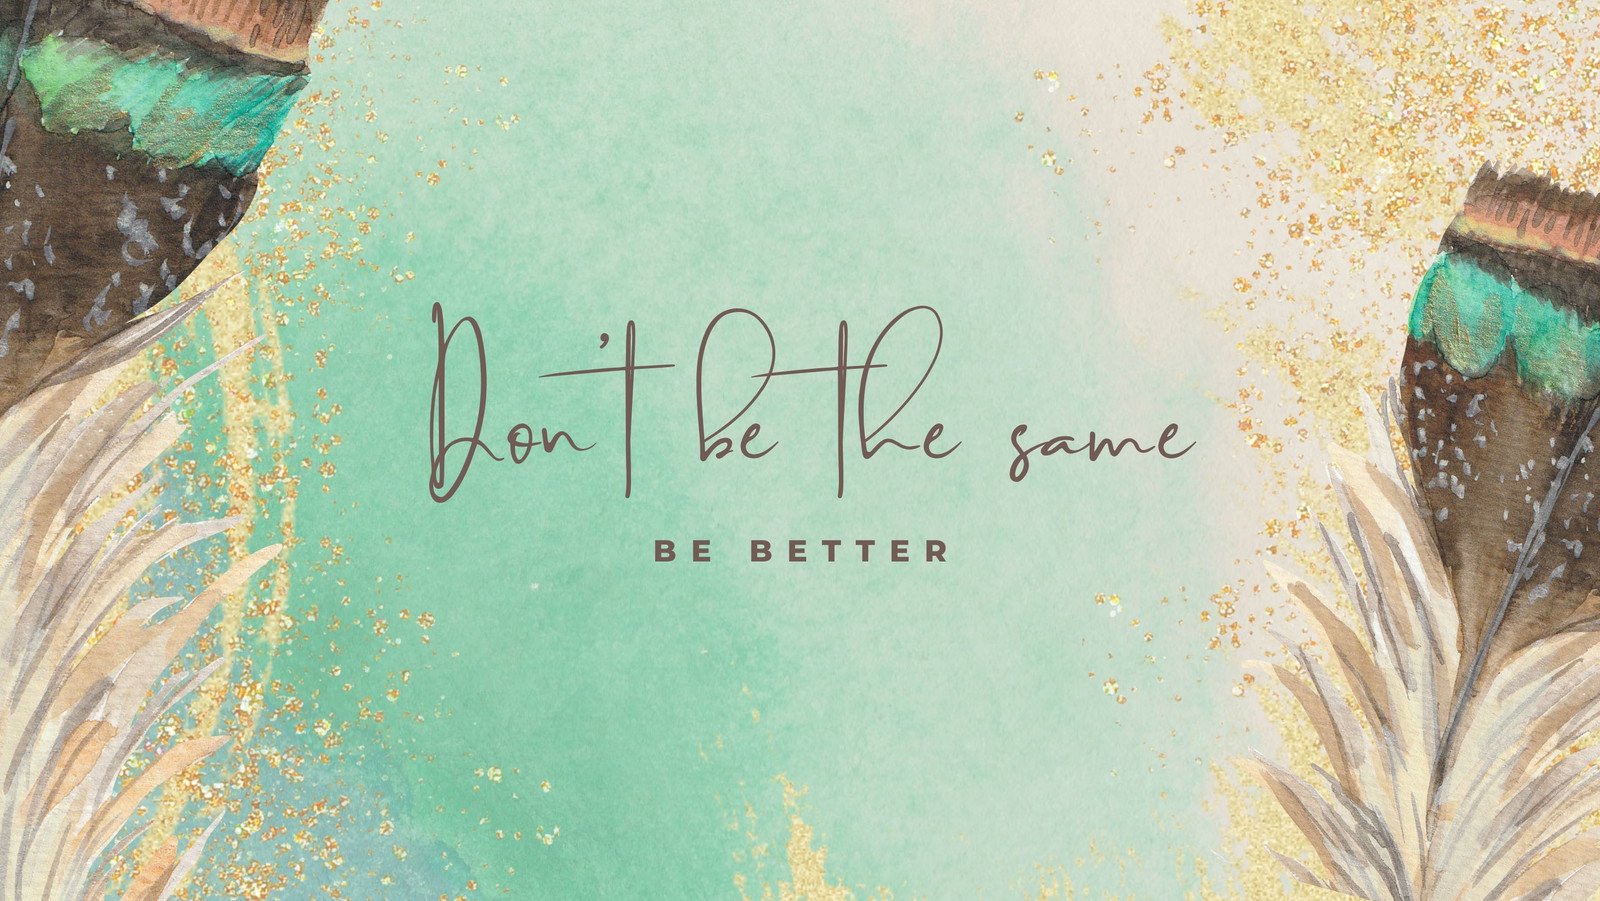 colorful quotes facebook covers